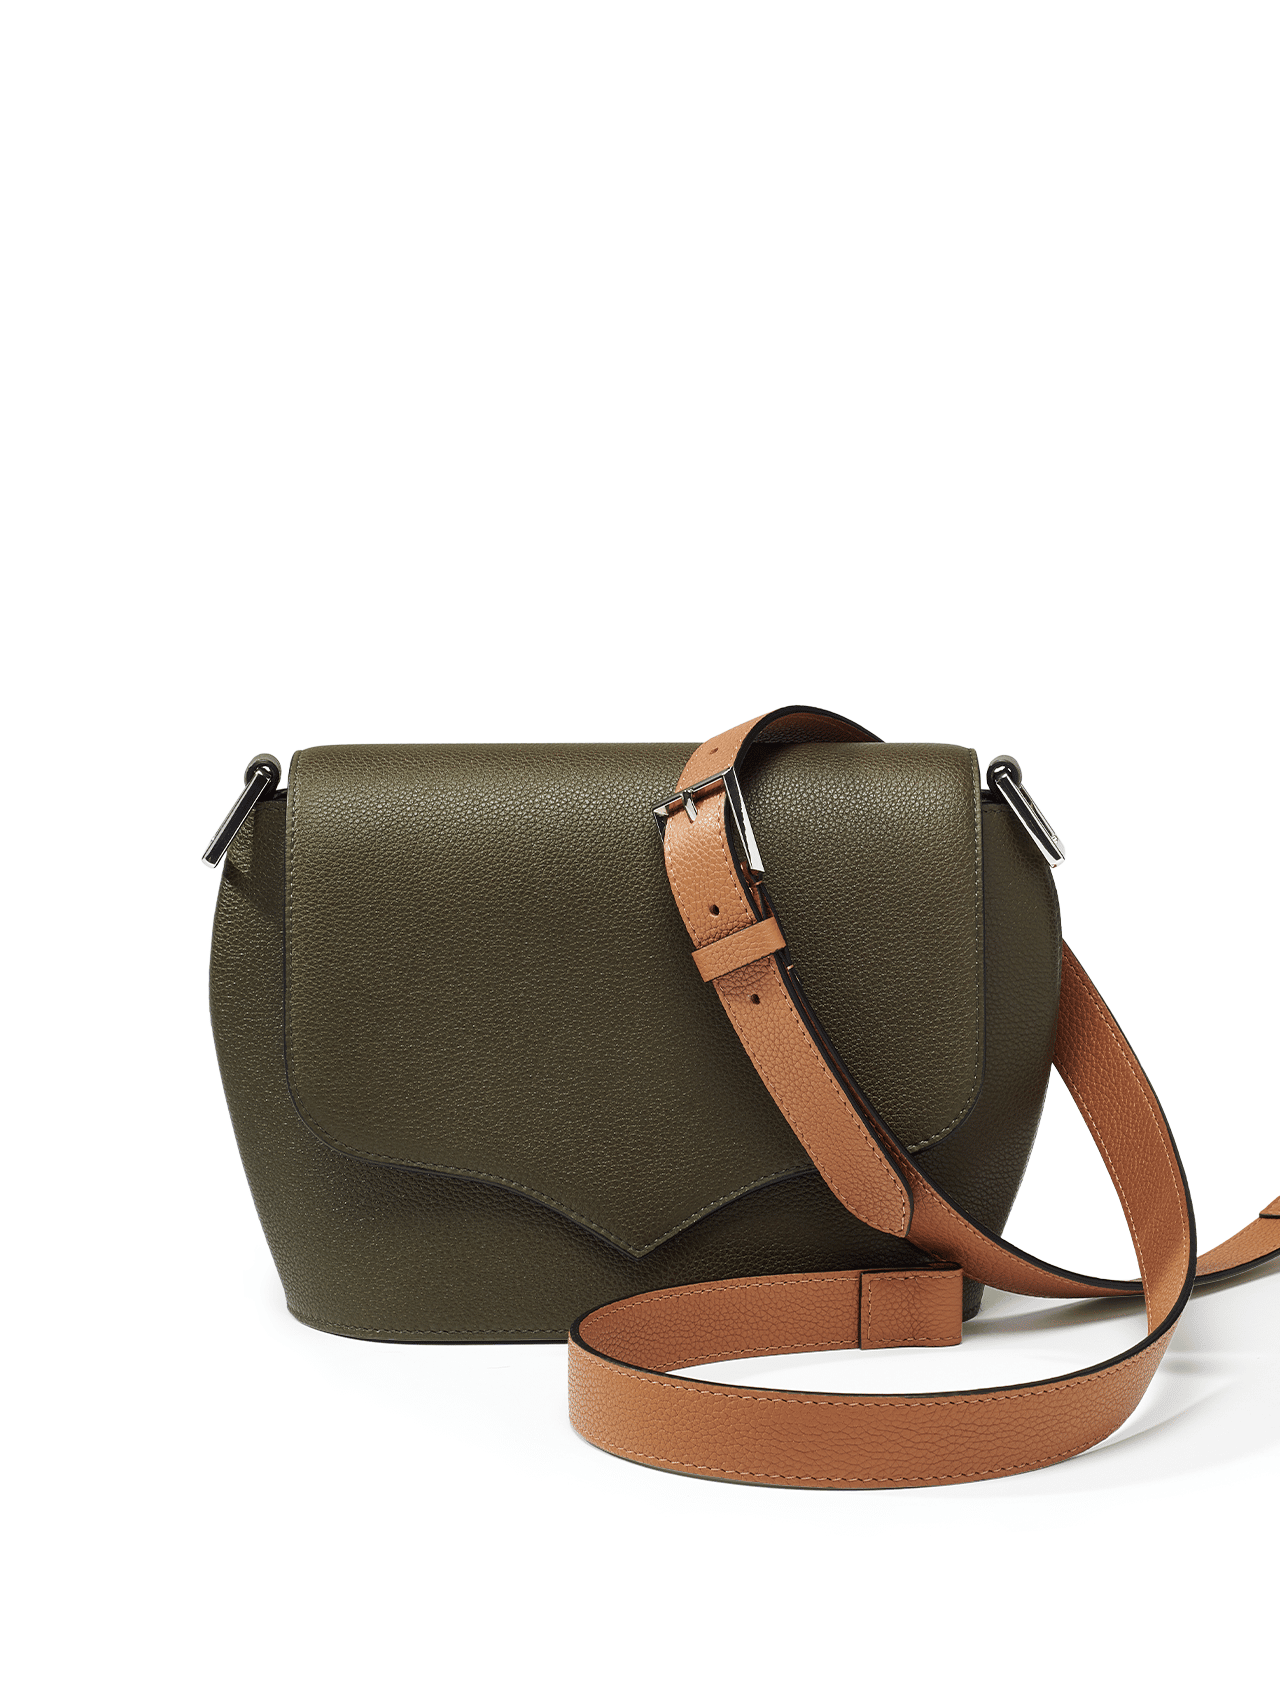 bag leather jean rousseau green brown